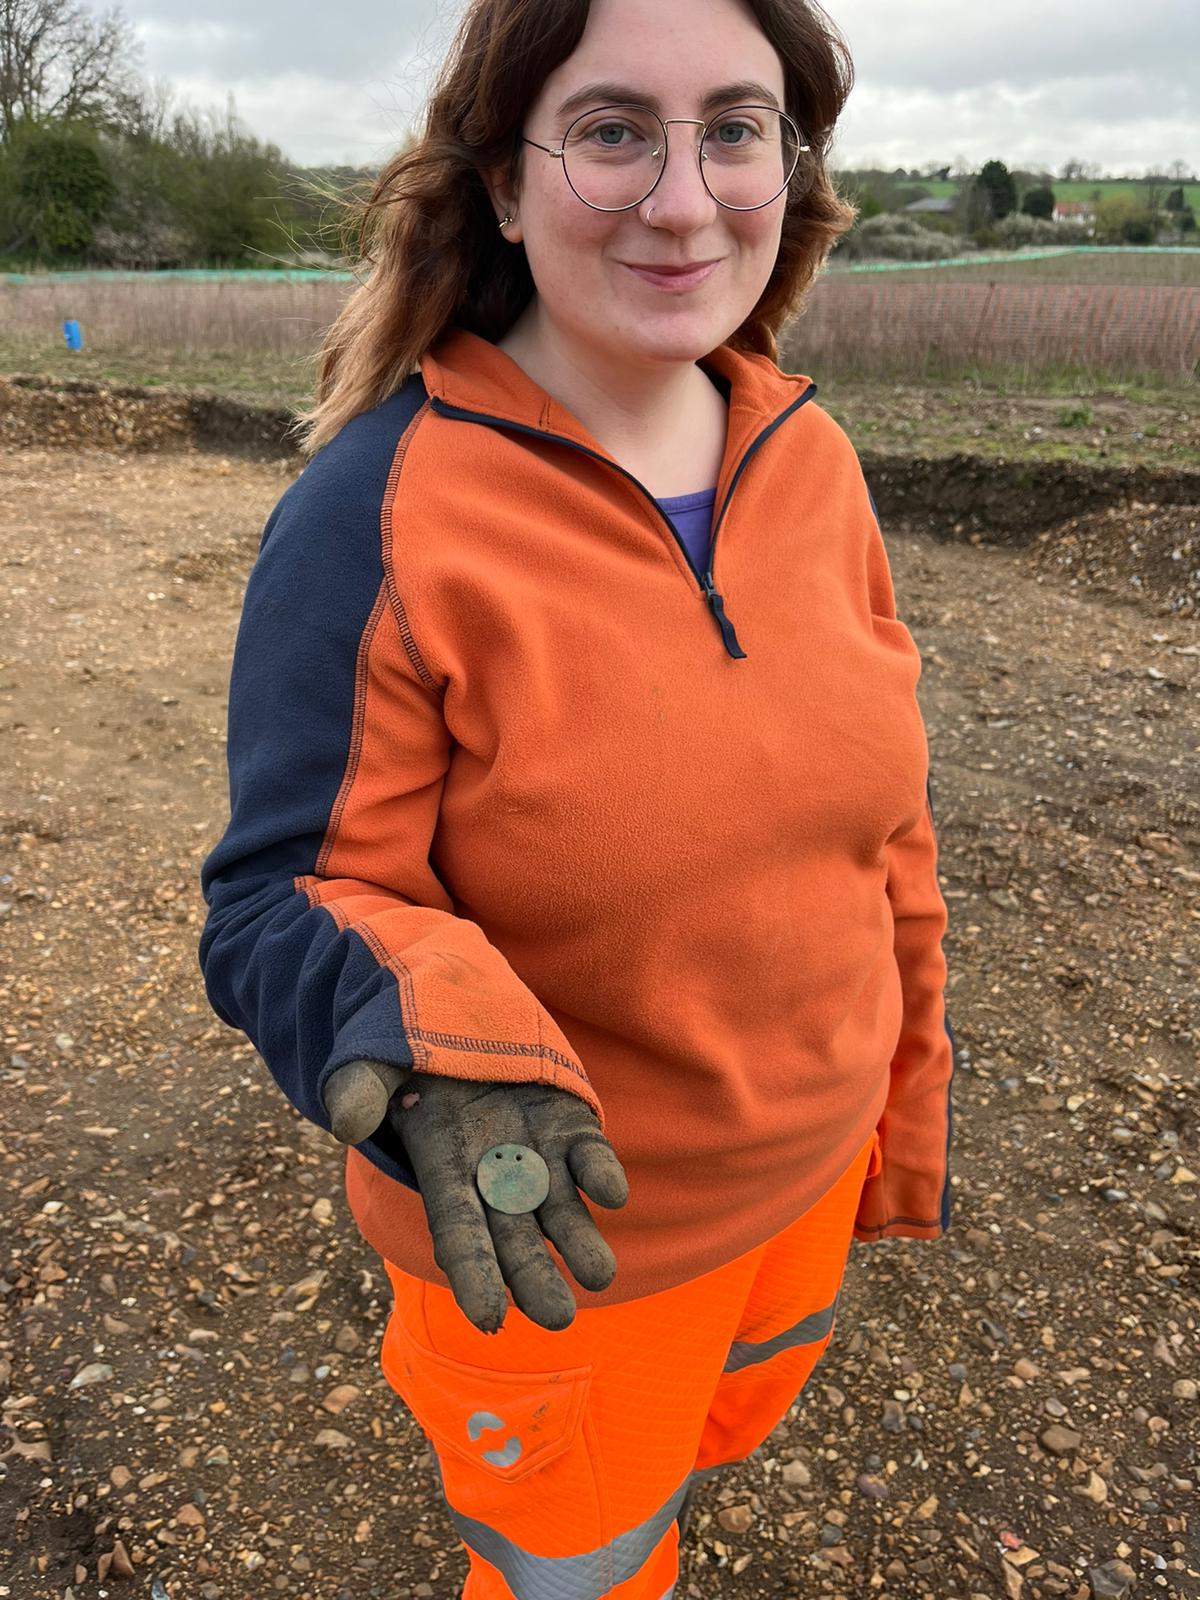 Archaeologist in an orange fleece holding a round metal disc pierced by two holes.